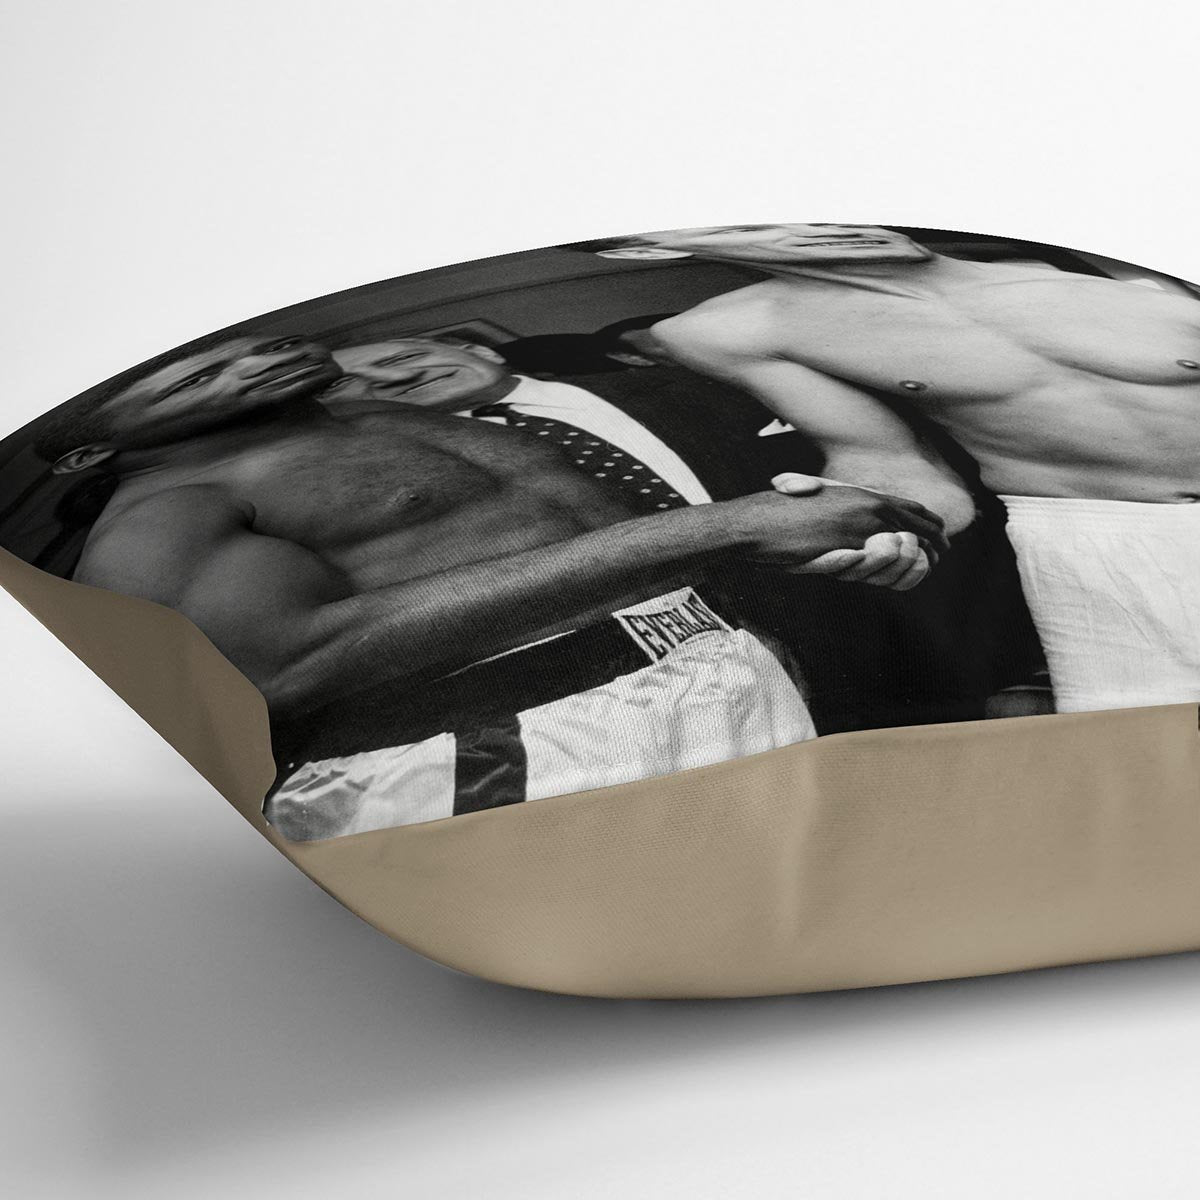 Boxers Floyd Patterson and Henry Cooper Cushion